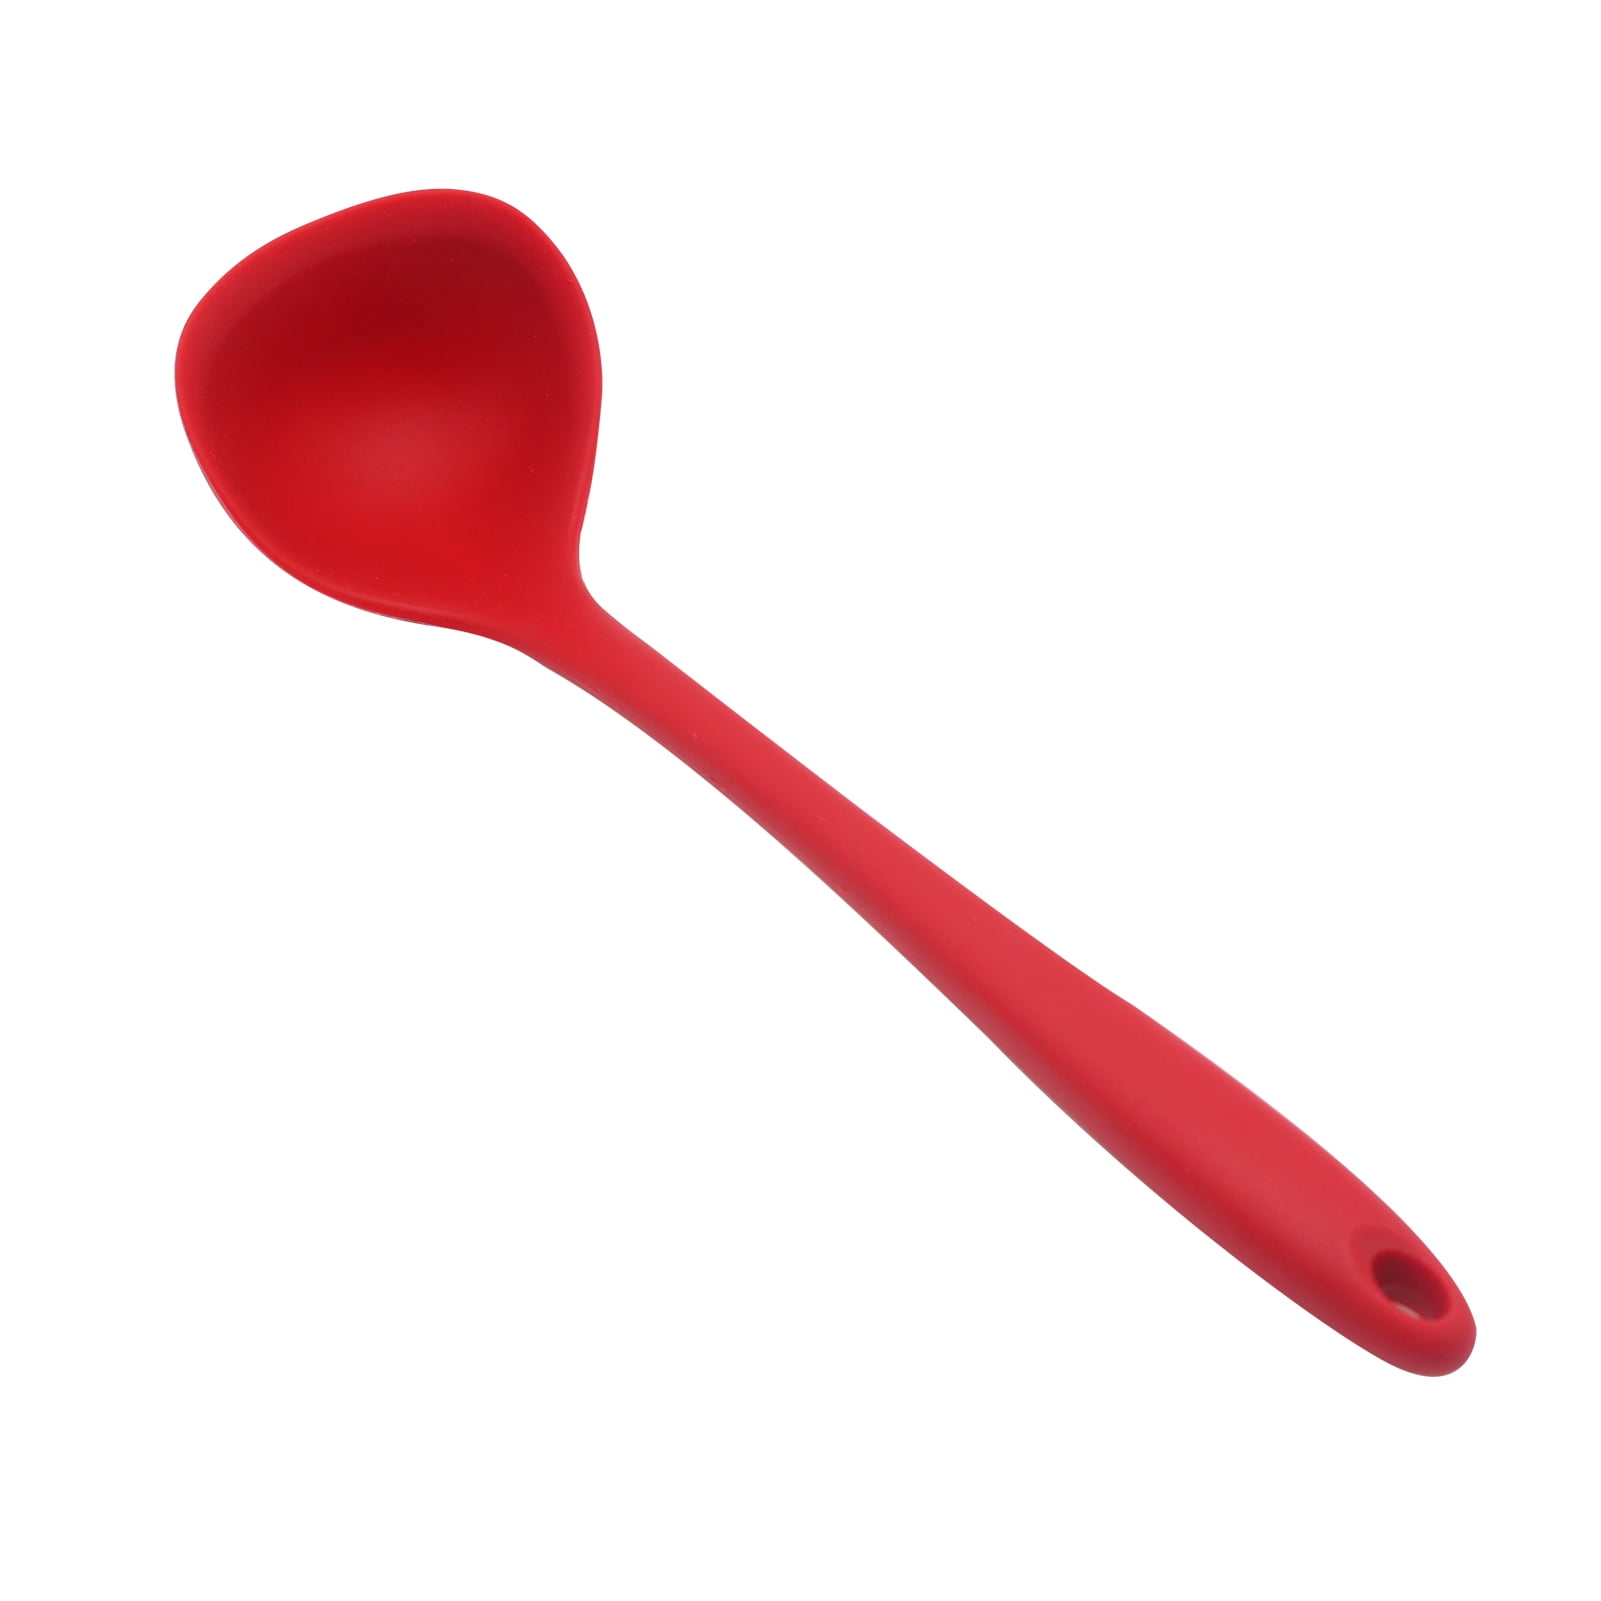 Yulohass 5 Pieces Silicone Ladles for Cooking - Small Soup Ladle Spoon Heat Resistant Kitchen Ladle Spoons, Cooking and Serving Spoon for Soup Sauce